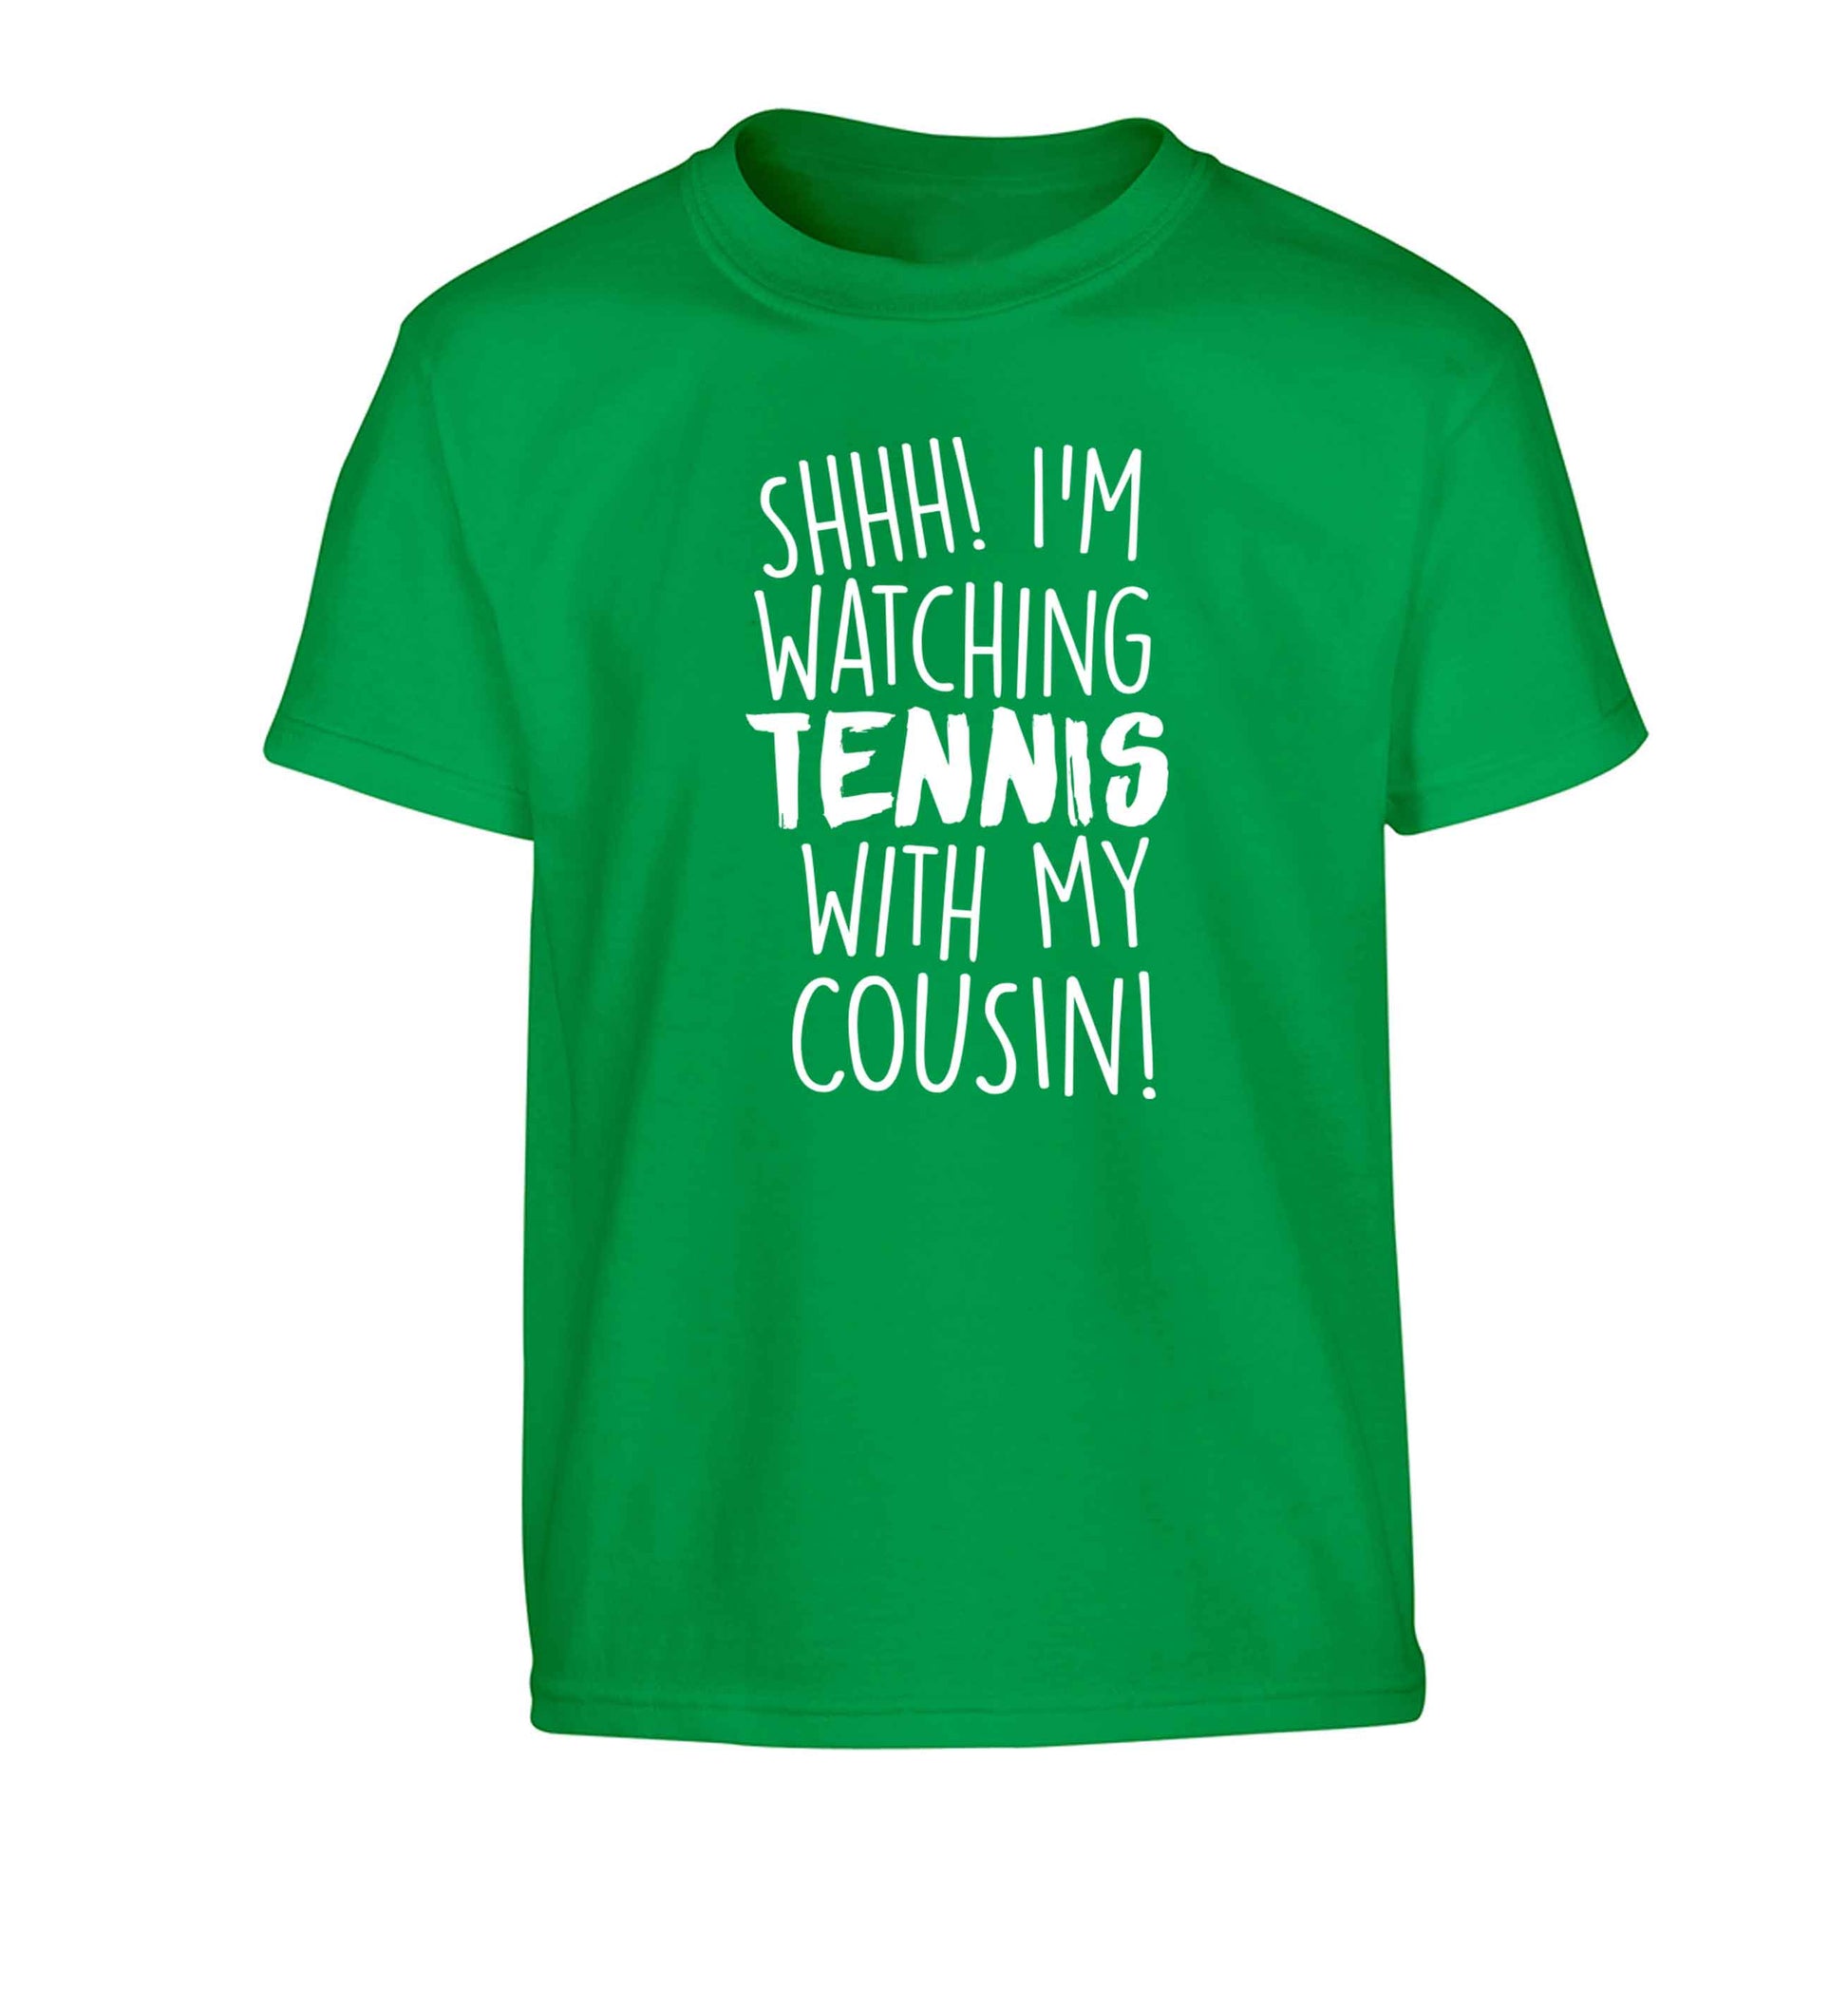 Shh! I'm watching tennis with my cousin! Children's green Tshirt 12-13 Years